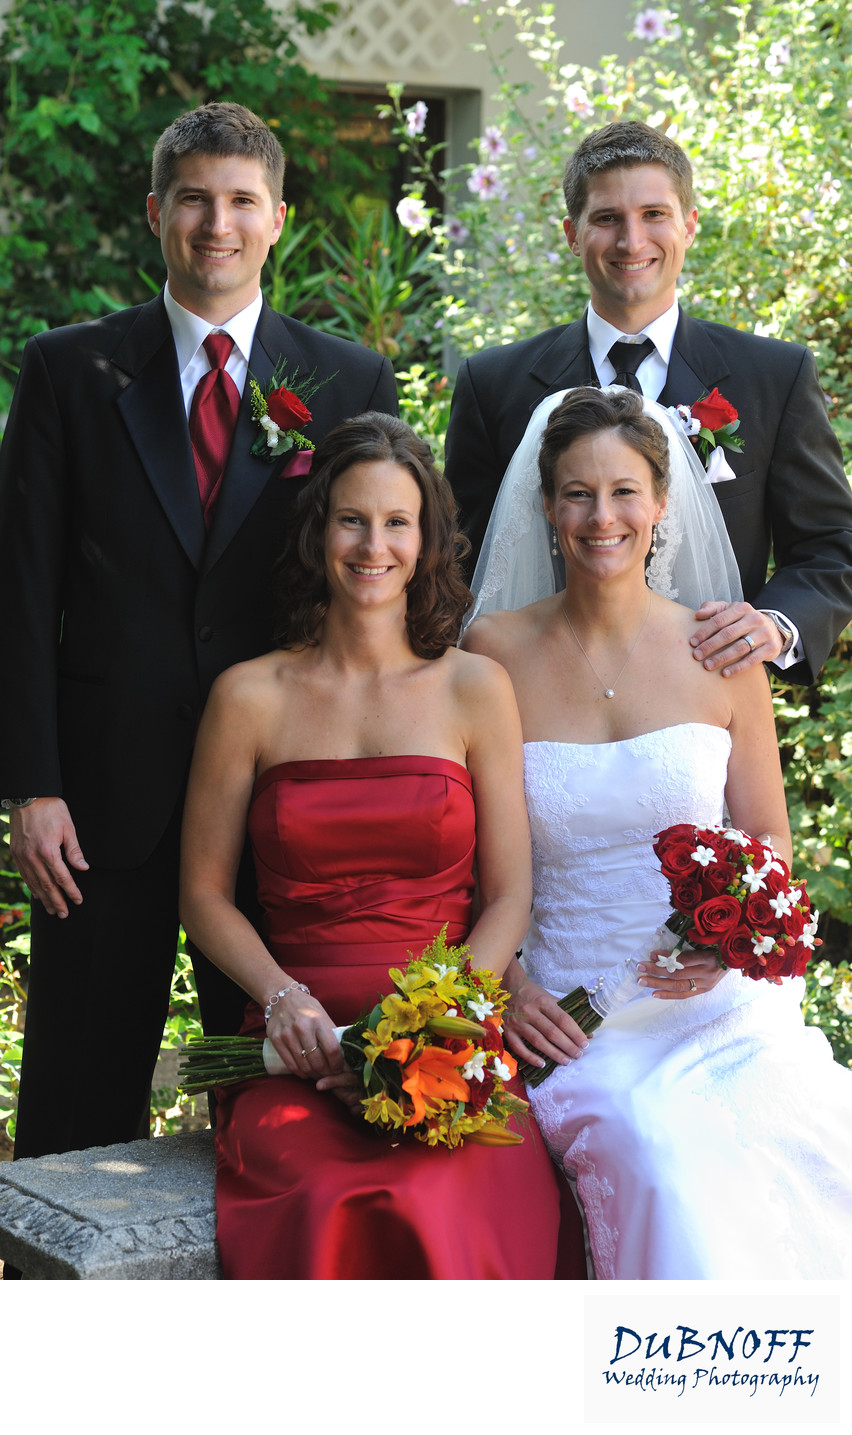 Unique Wedding with a Pair of Twin Brides and Grooms